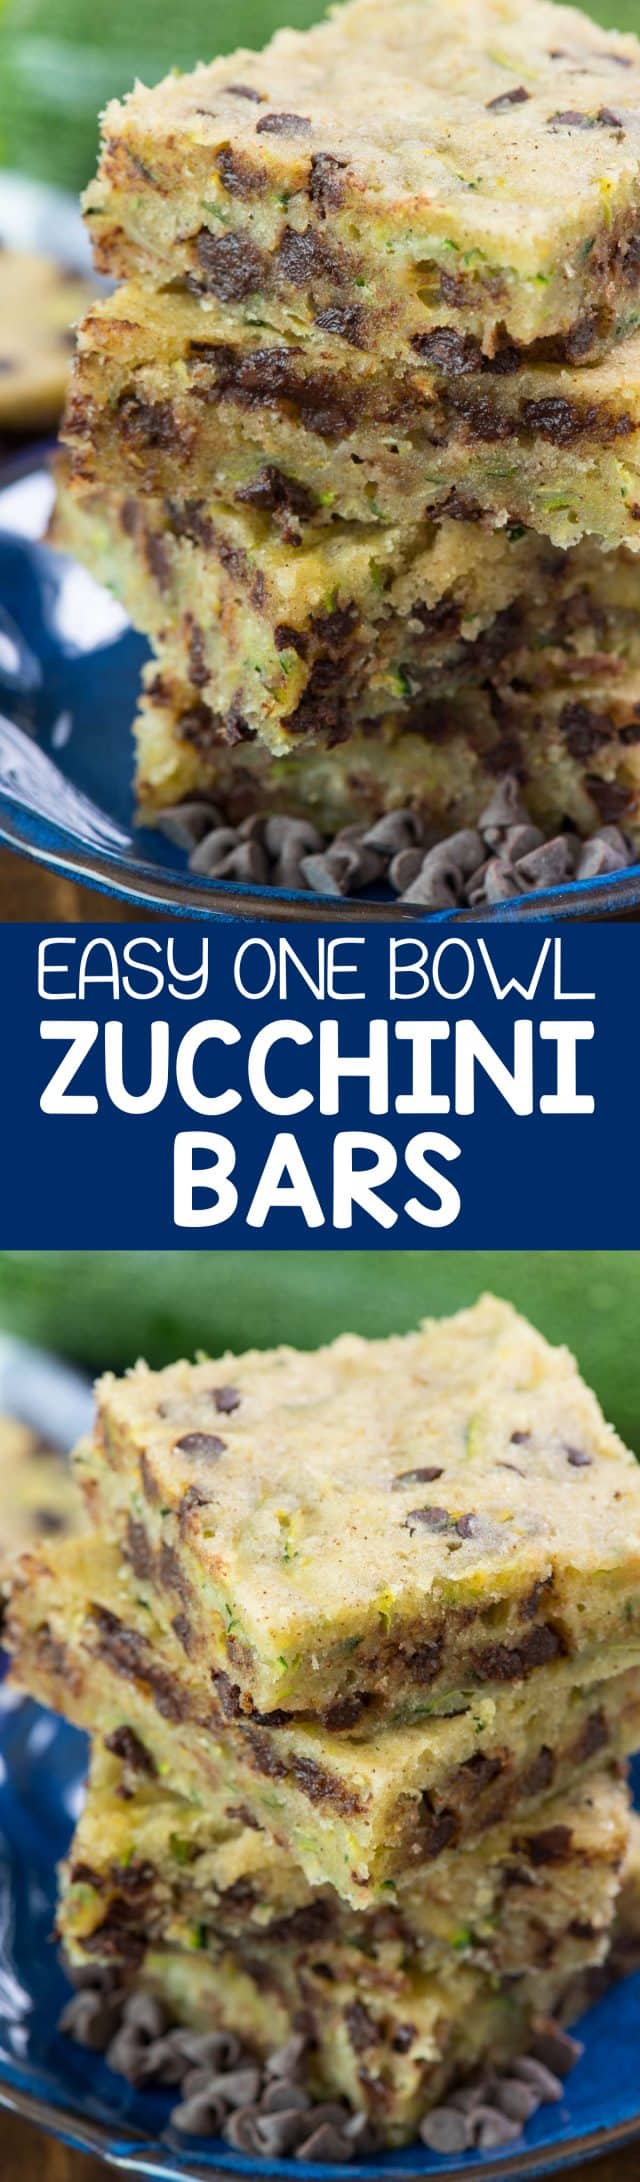 Chocolate Chip Zucchini Bars - this easy one bowl zucchini bar recipe isn't quite a cookie or a cake but it's a delicious soft and sweet dessert full of zucchini and chocolate!